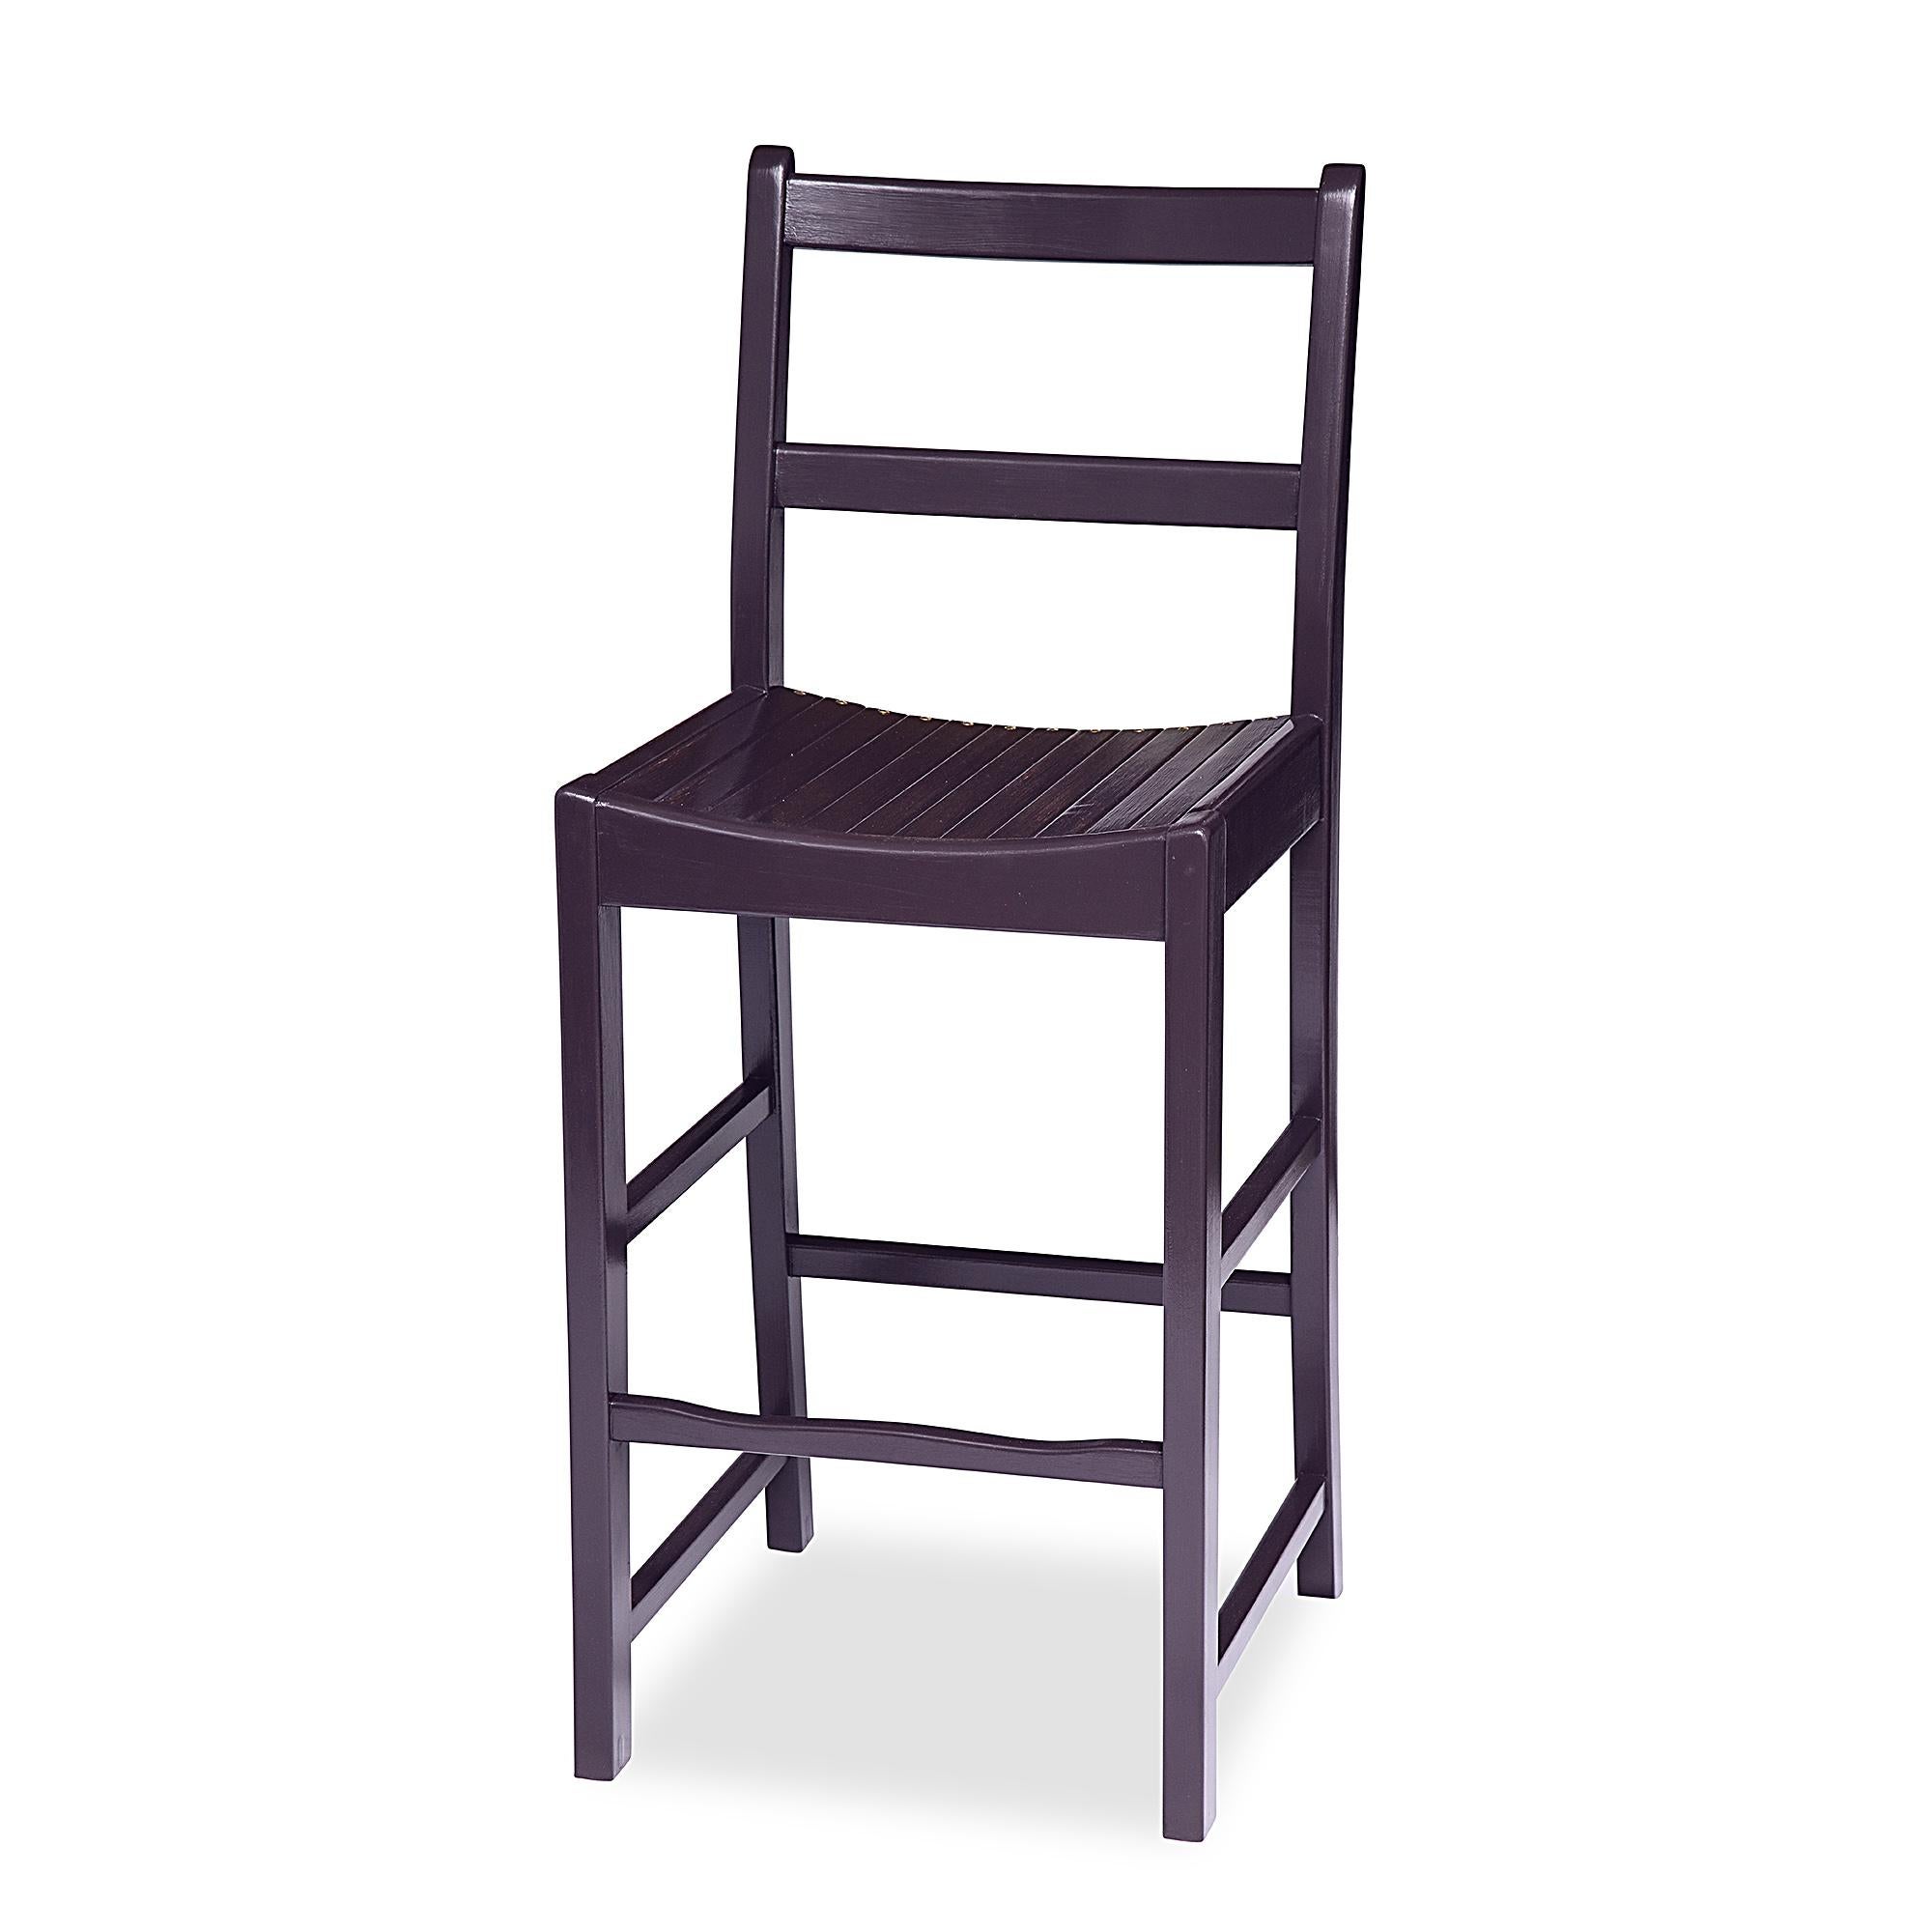 Available in any wood finish or paint color

Custom made to any seat height

The A-M Bar Stool is completely custom made. The seat height is custom and can be any height not exceeding 30″. The color is custom. The A-M Bar Stool can be painted or